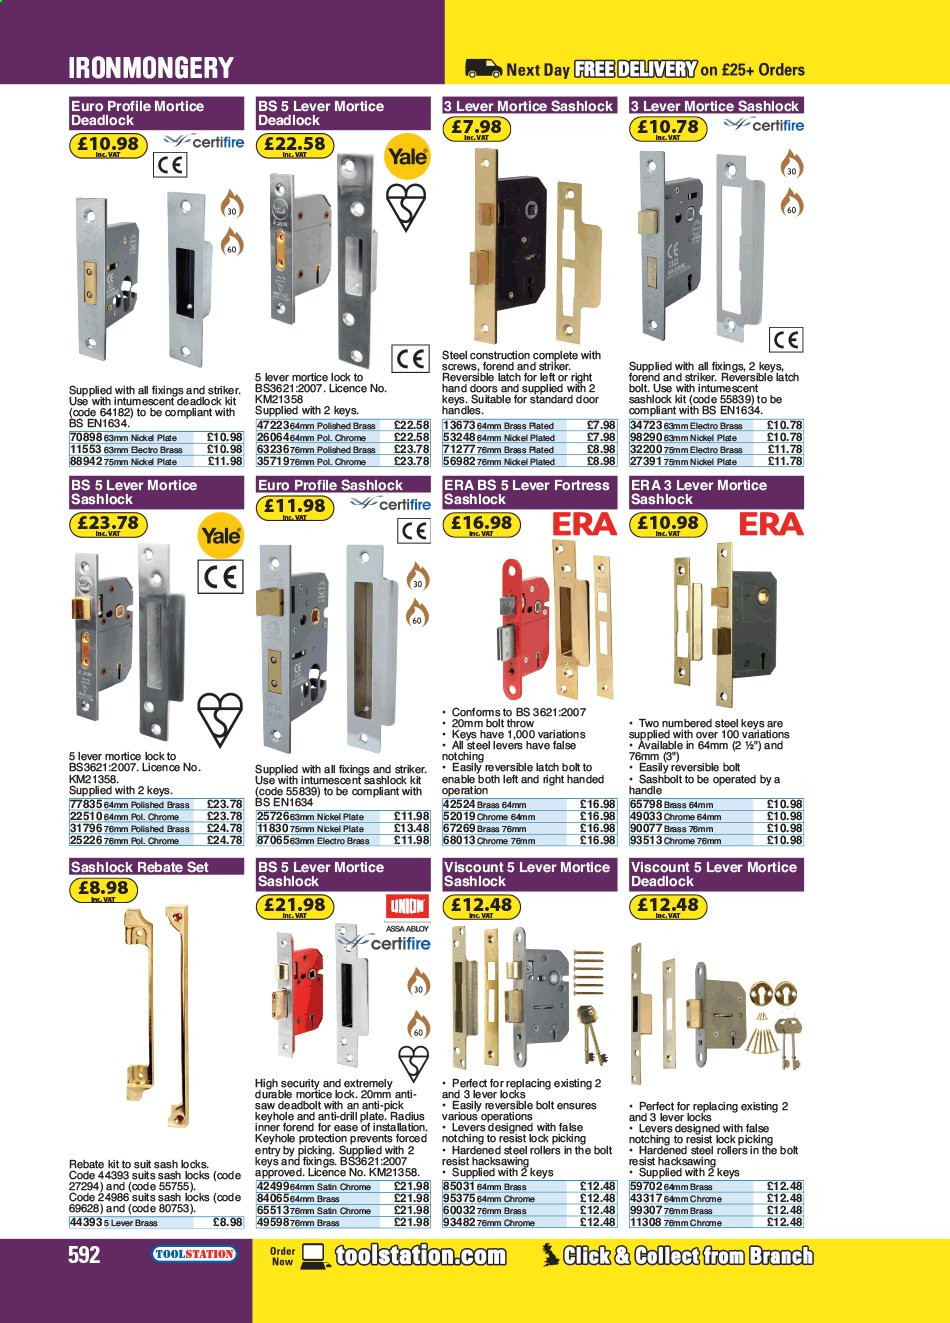 Toolstation offer . Page 592.